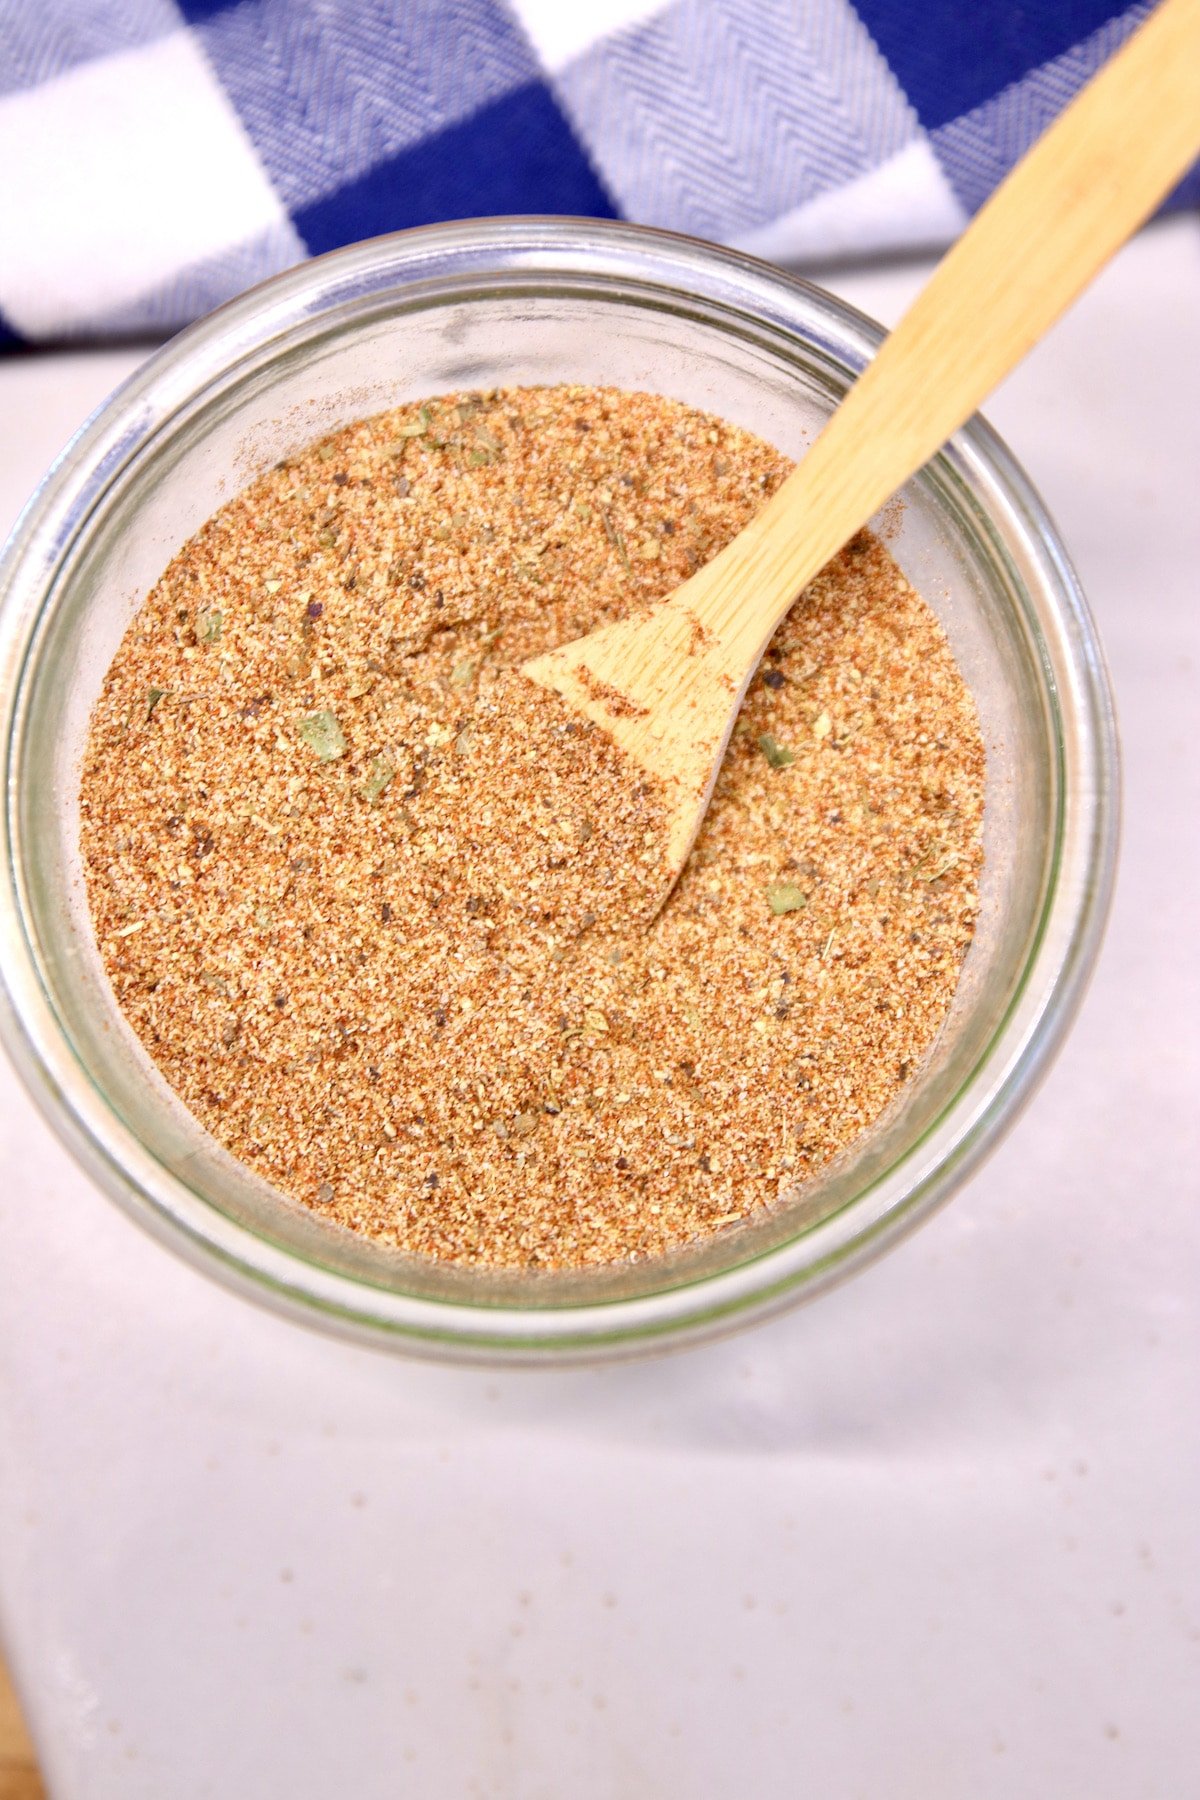 Cajun spice blend in a bowl with spoon.